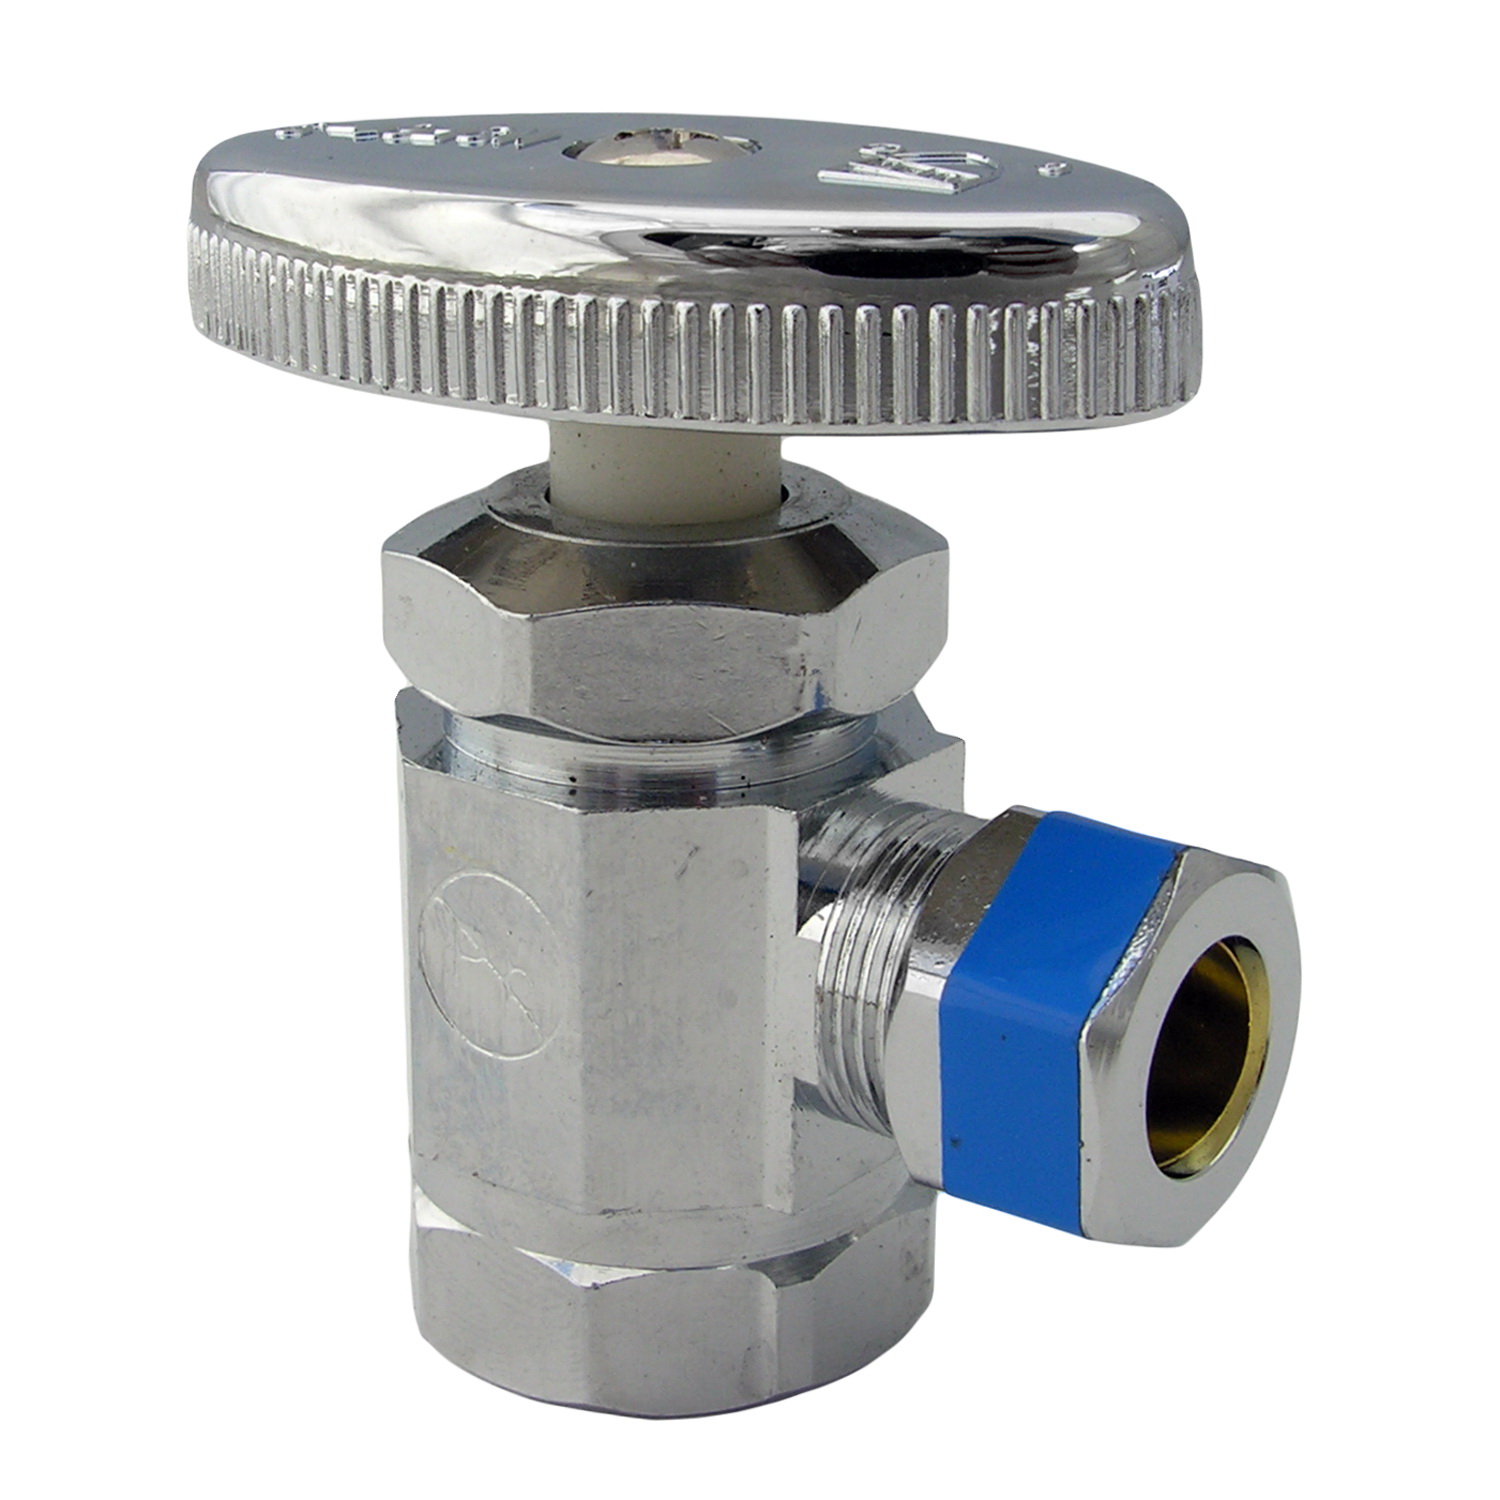 Lasco 06-7203 Standard-Duty Angle Stop Valve, 1/2 in Connection, FIP x Compression, Brass Body